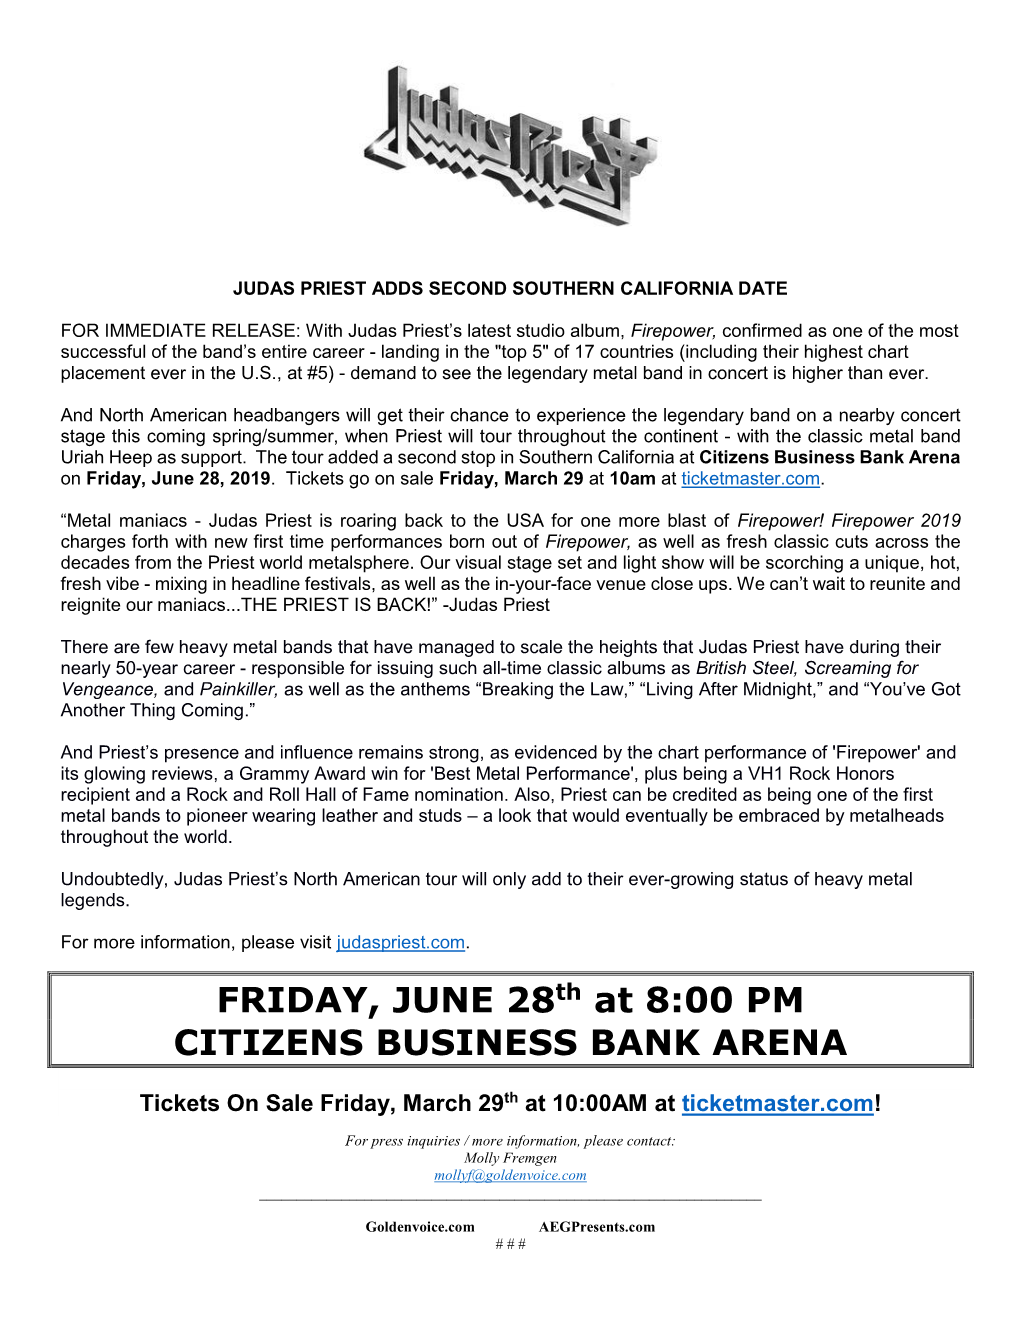 FRIDAY, JUNE 28Th at 8:00 PM CITIZENS BUSINESS BANK ARENA